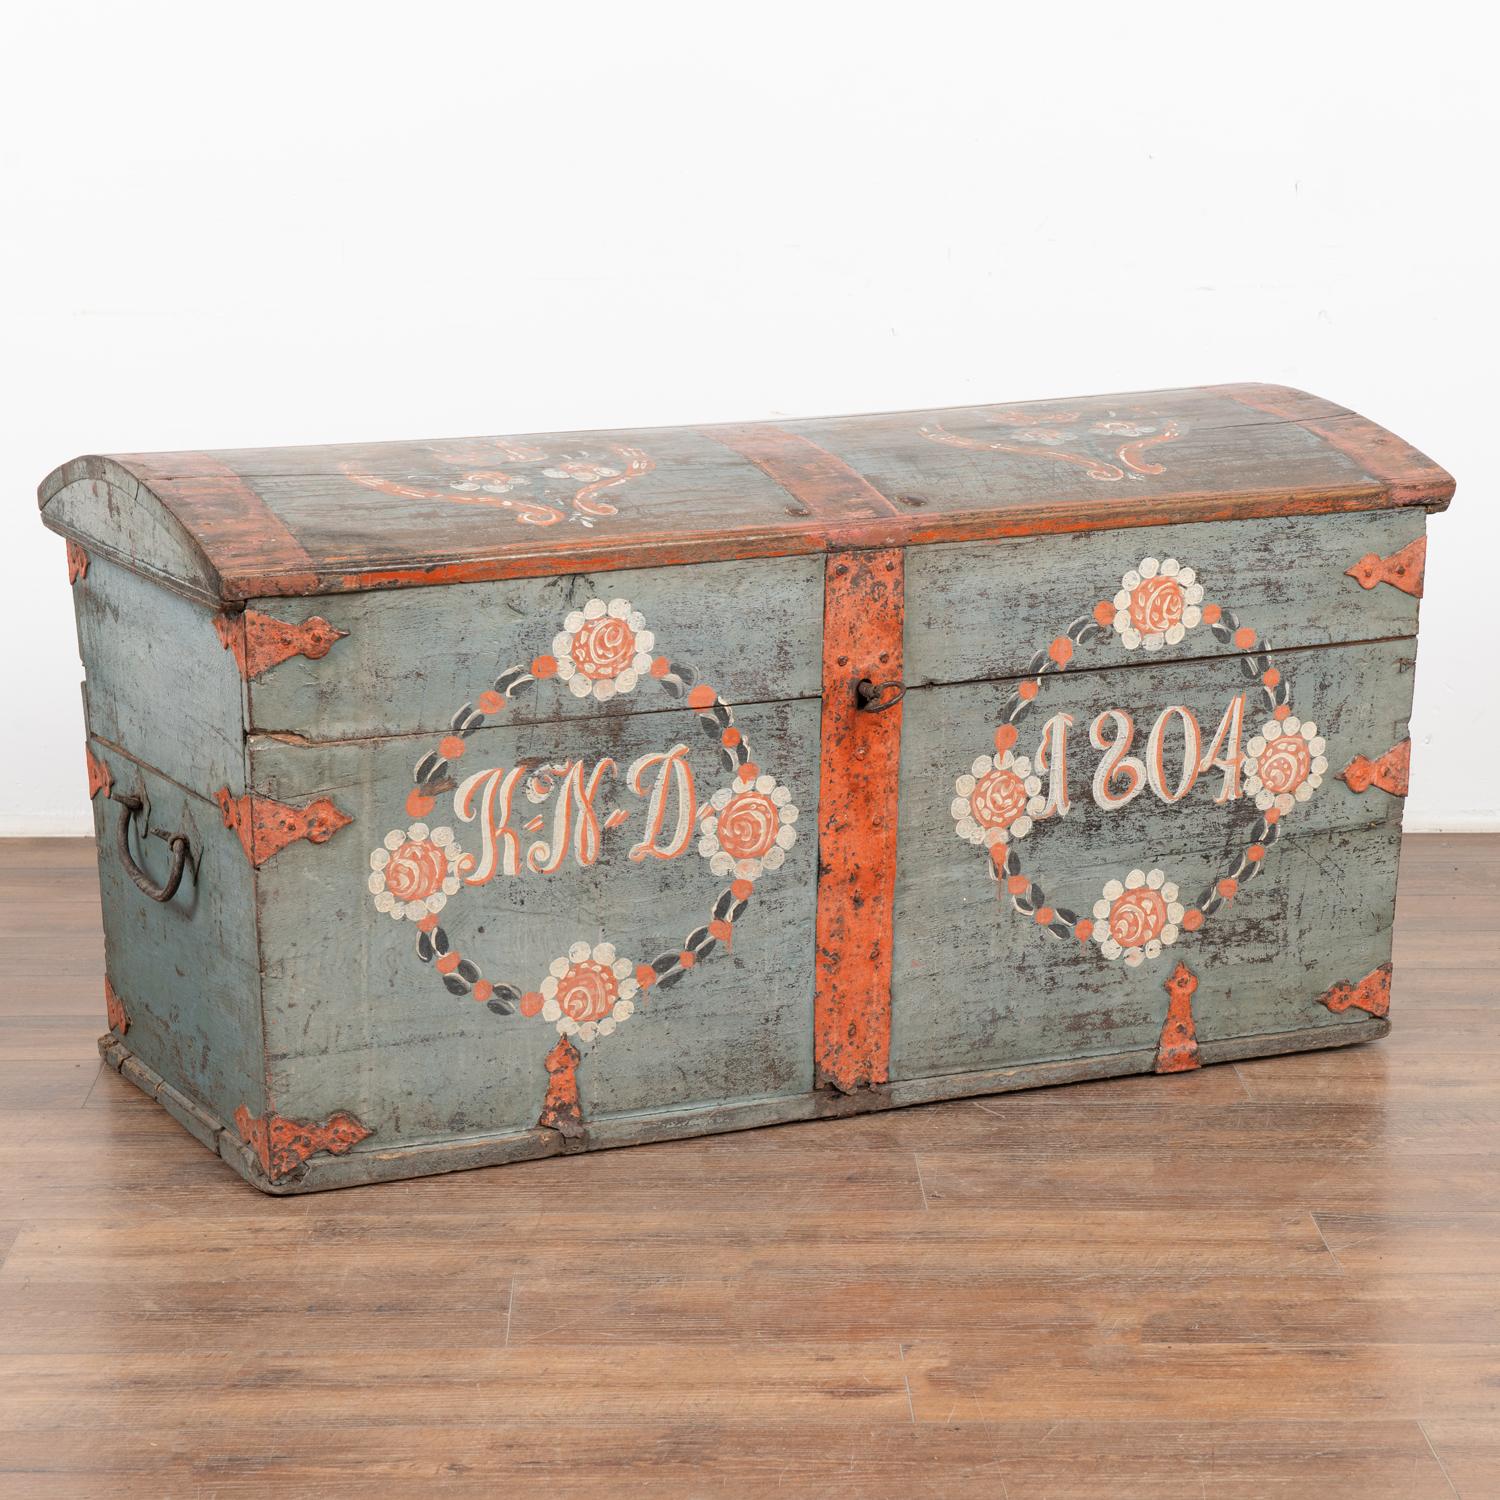 Original blue painted dome top oak trunk from Sweden with traditional hand-painted details include floral motif along top and front.
Monogram of KND and date 